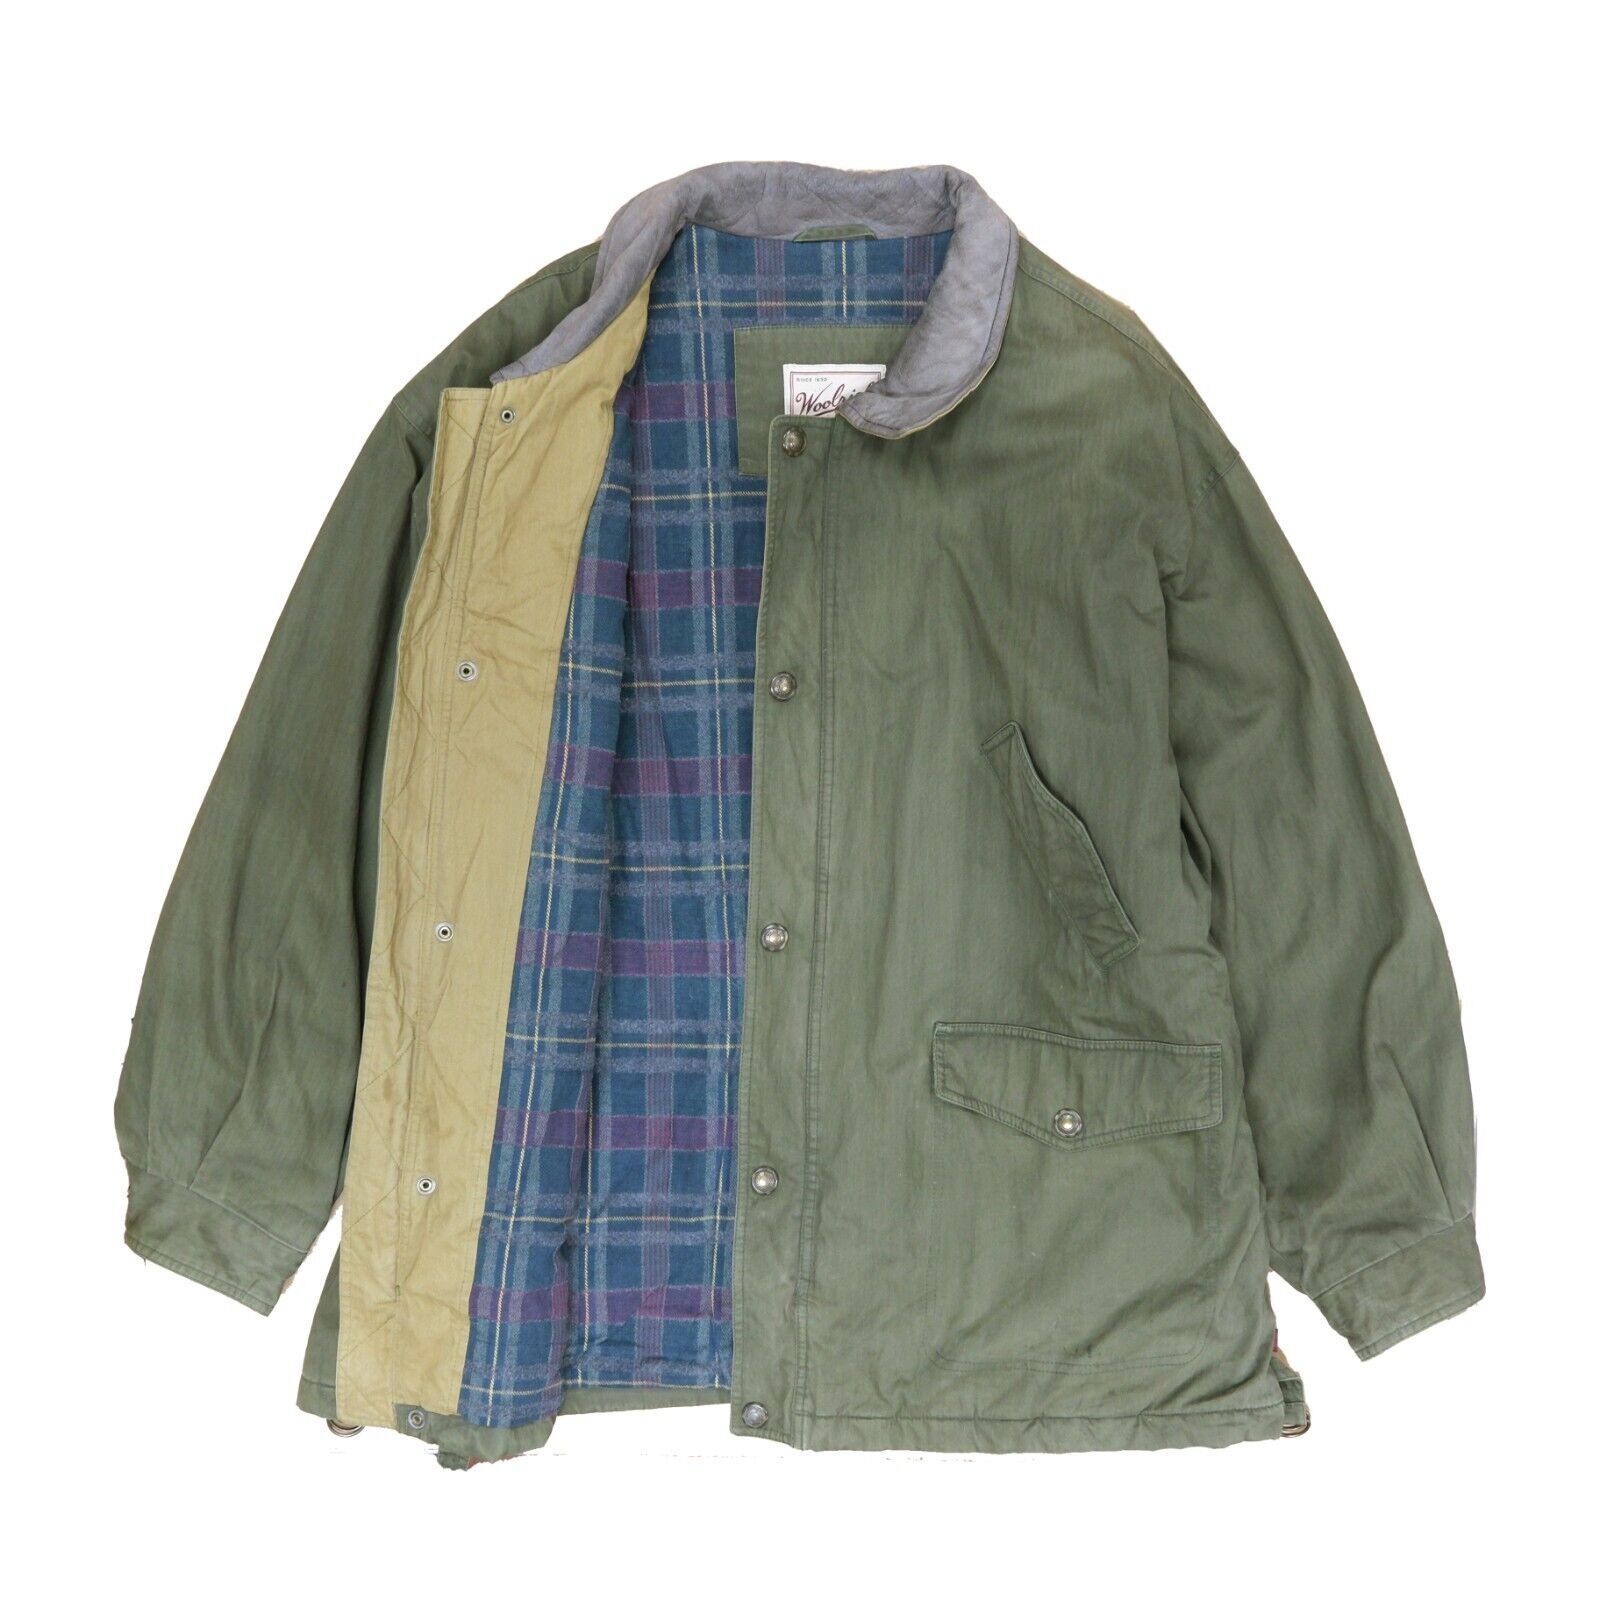 Vintage Woolrich Barn Work Coat Jacket Size 2XL Green Plaid Lined